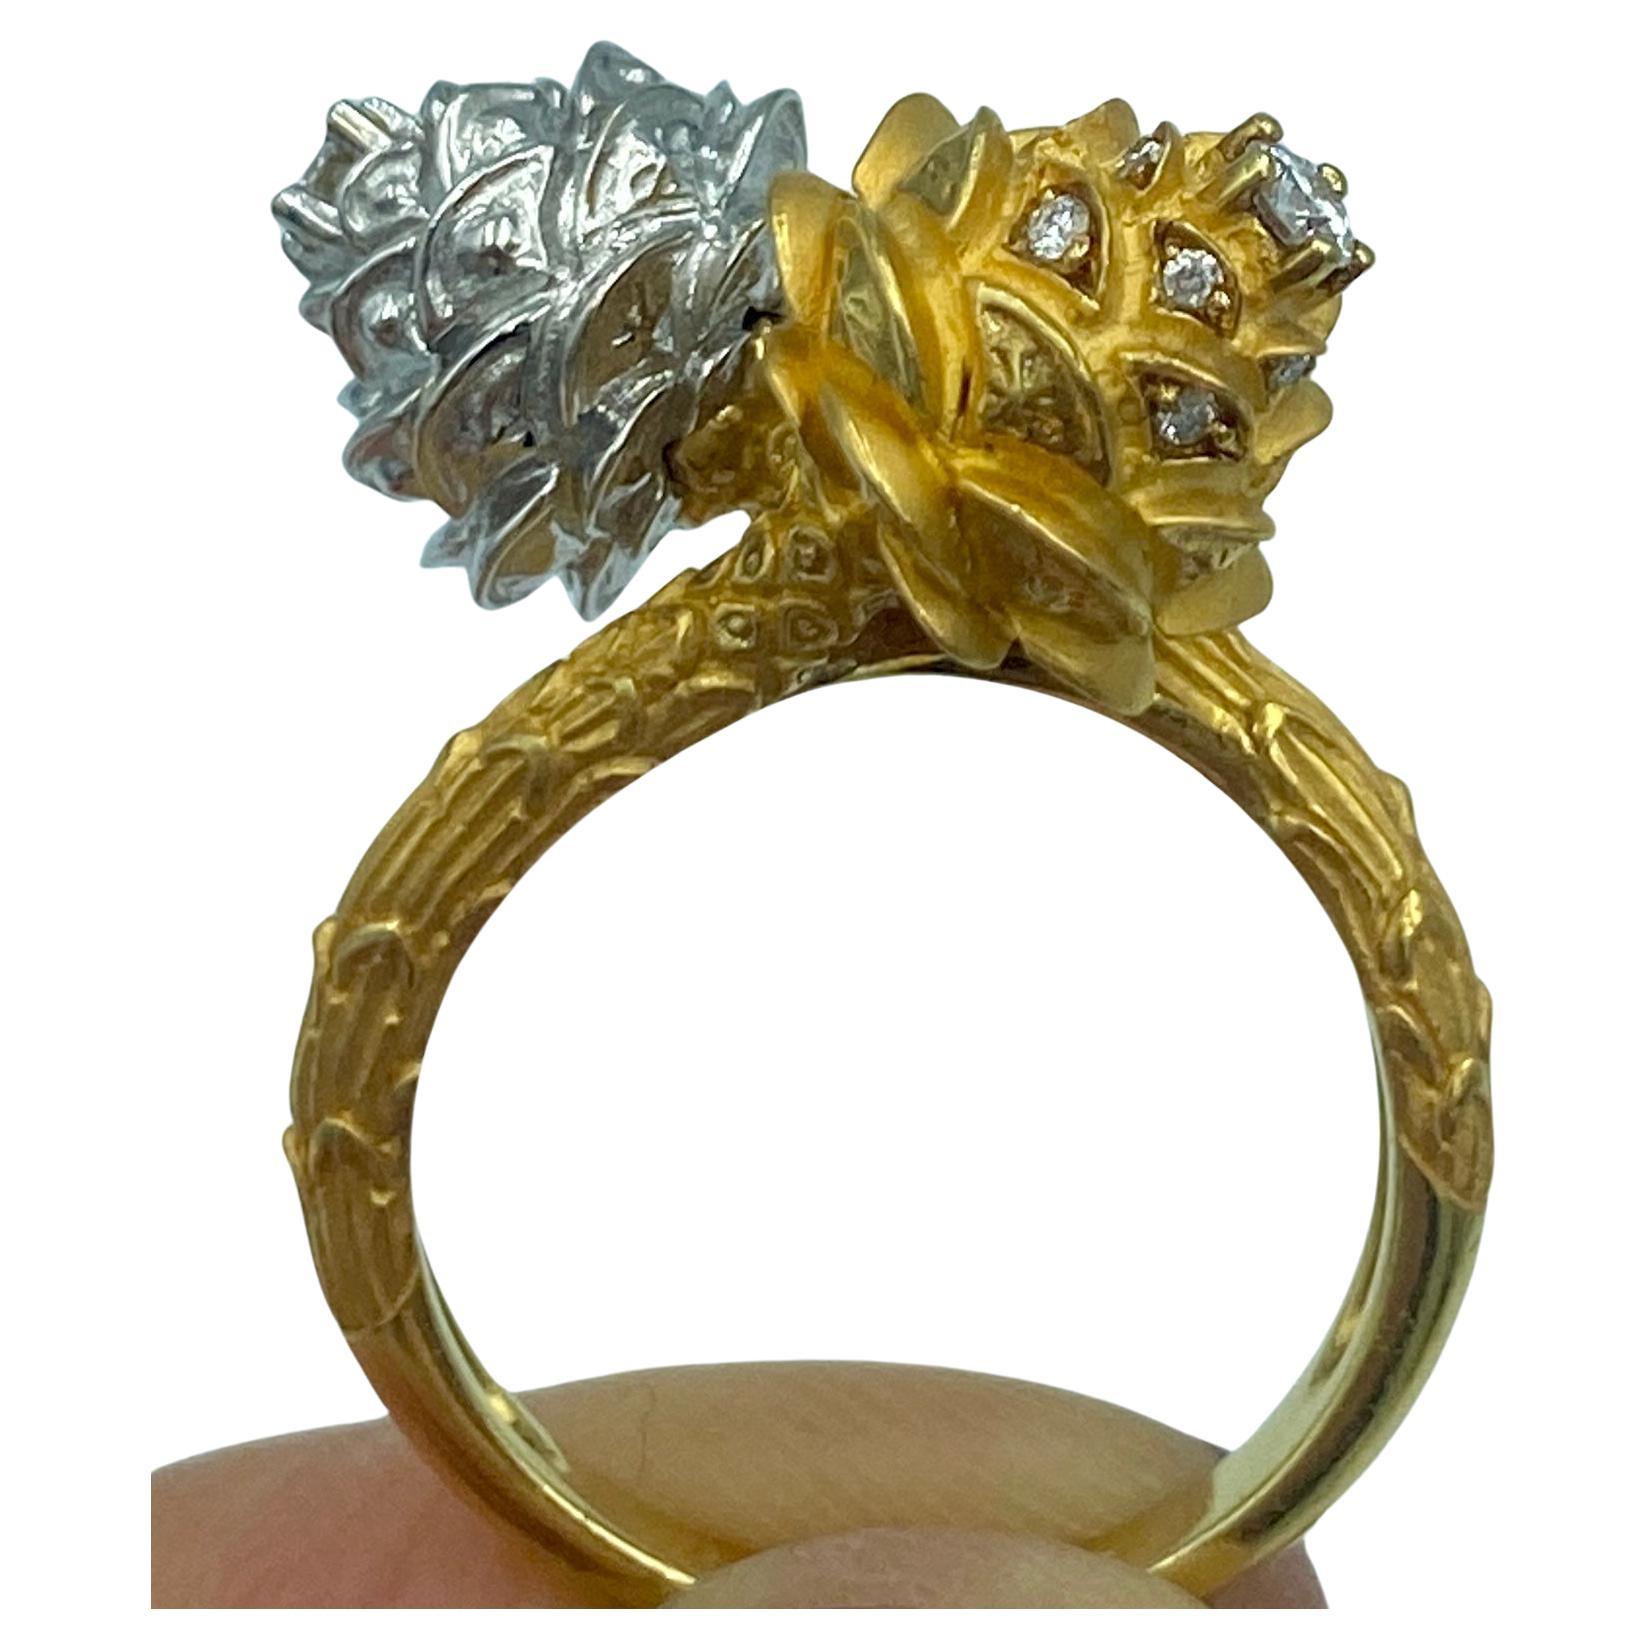 Carrera y Carrera 18k yellow and white gold pine cone ring with diamonds